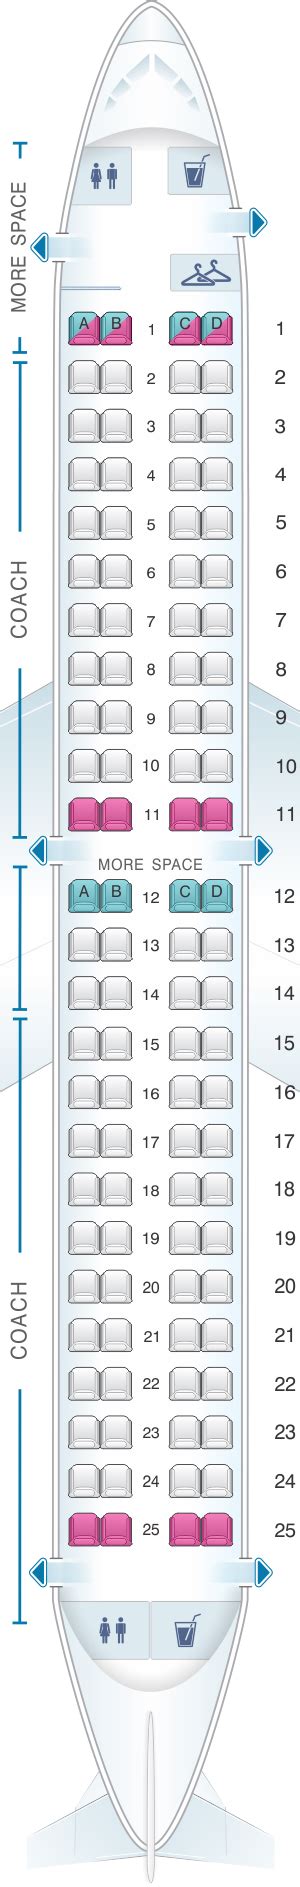 Jetblue e190 seat map. Advertiser Disclosure: Many of the credit card offers and links that appear on the website are from credit card companies or websites from which Seatlink.com receives compensation 